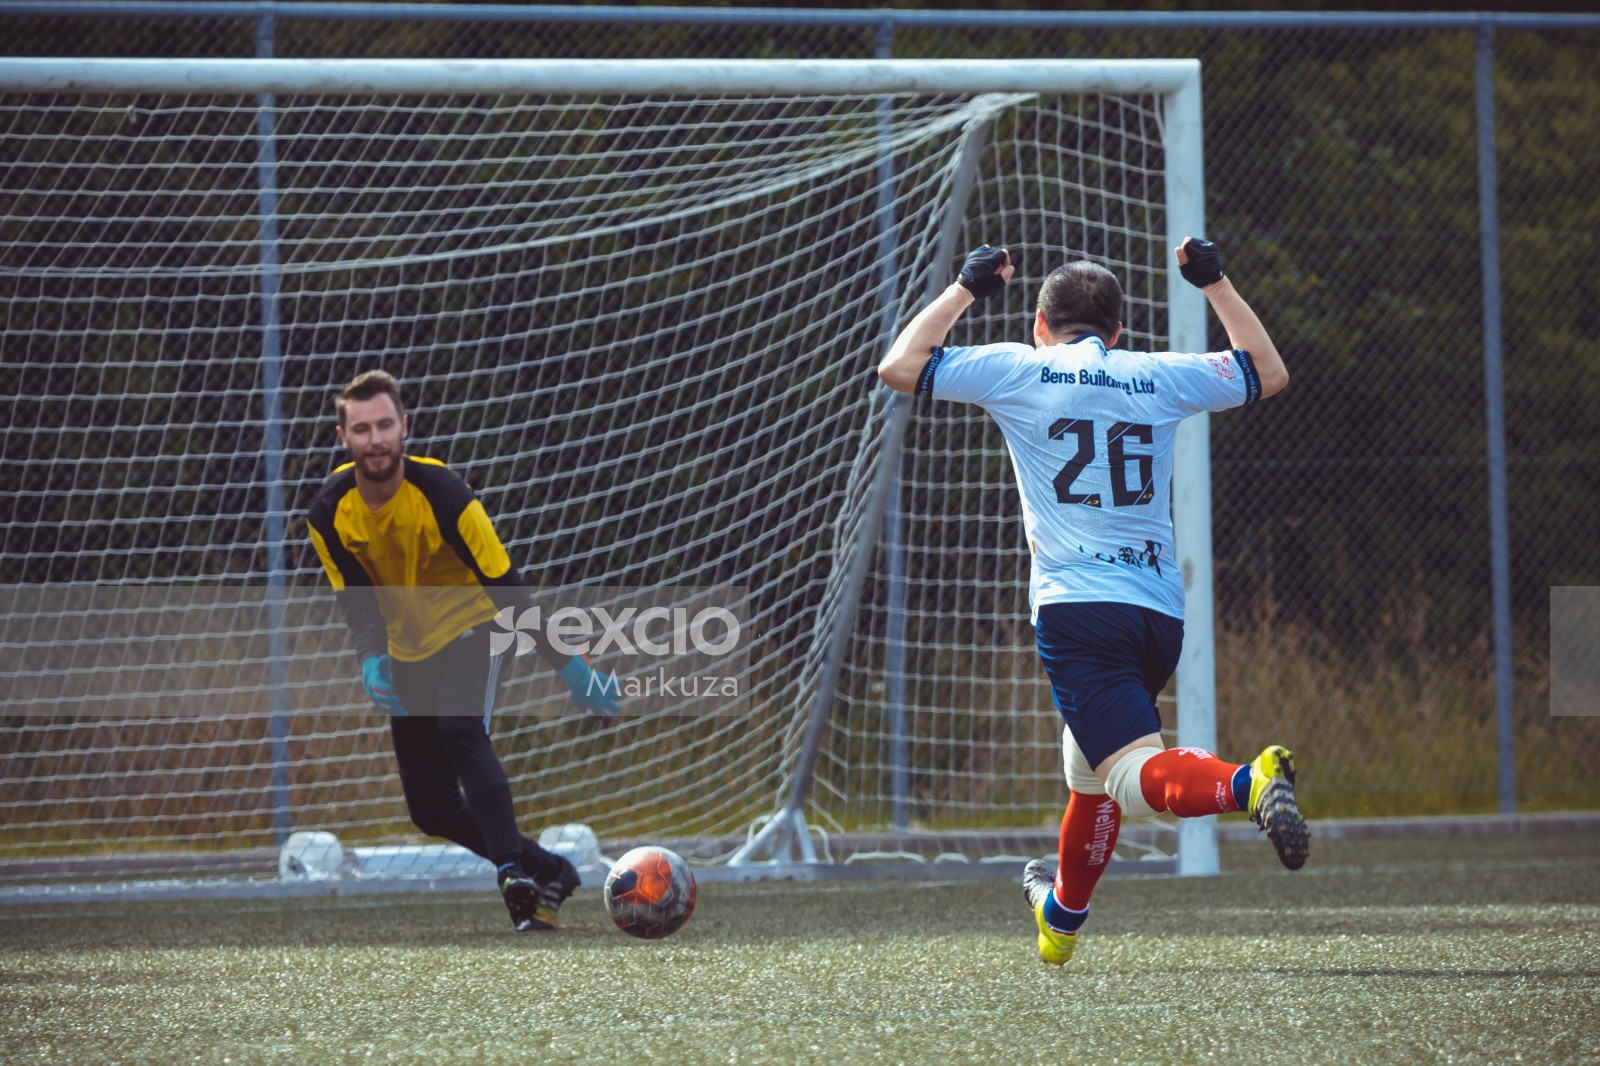 Football player raising both hands in the air - Sports Zone sunday league